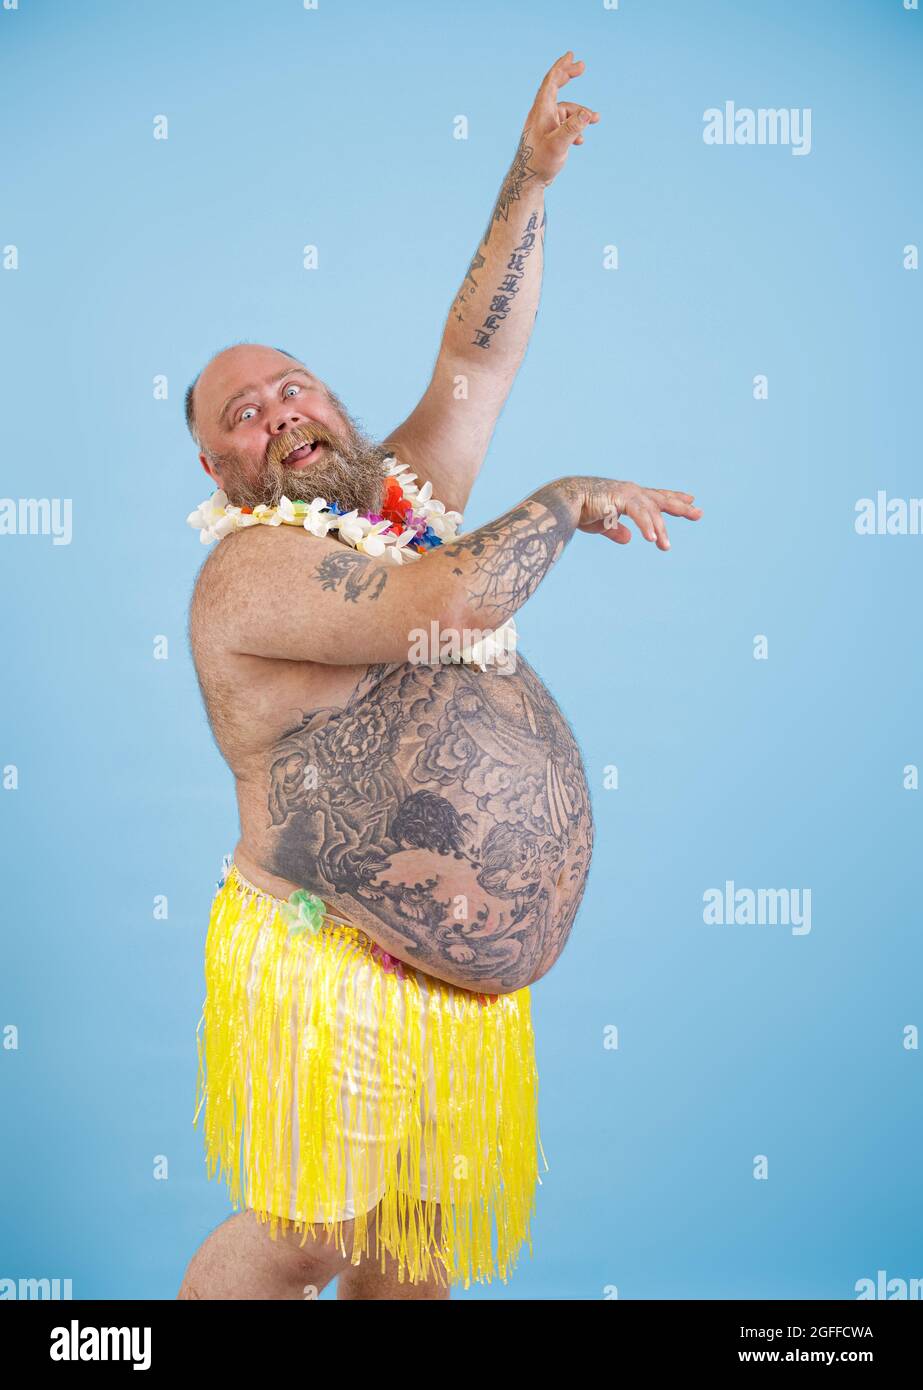 Funny obese man in decorative grass skirt and garland dances on light blue background Stock Photo